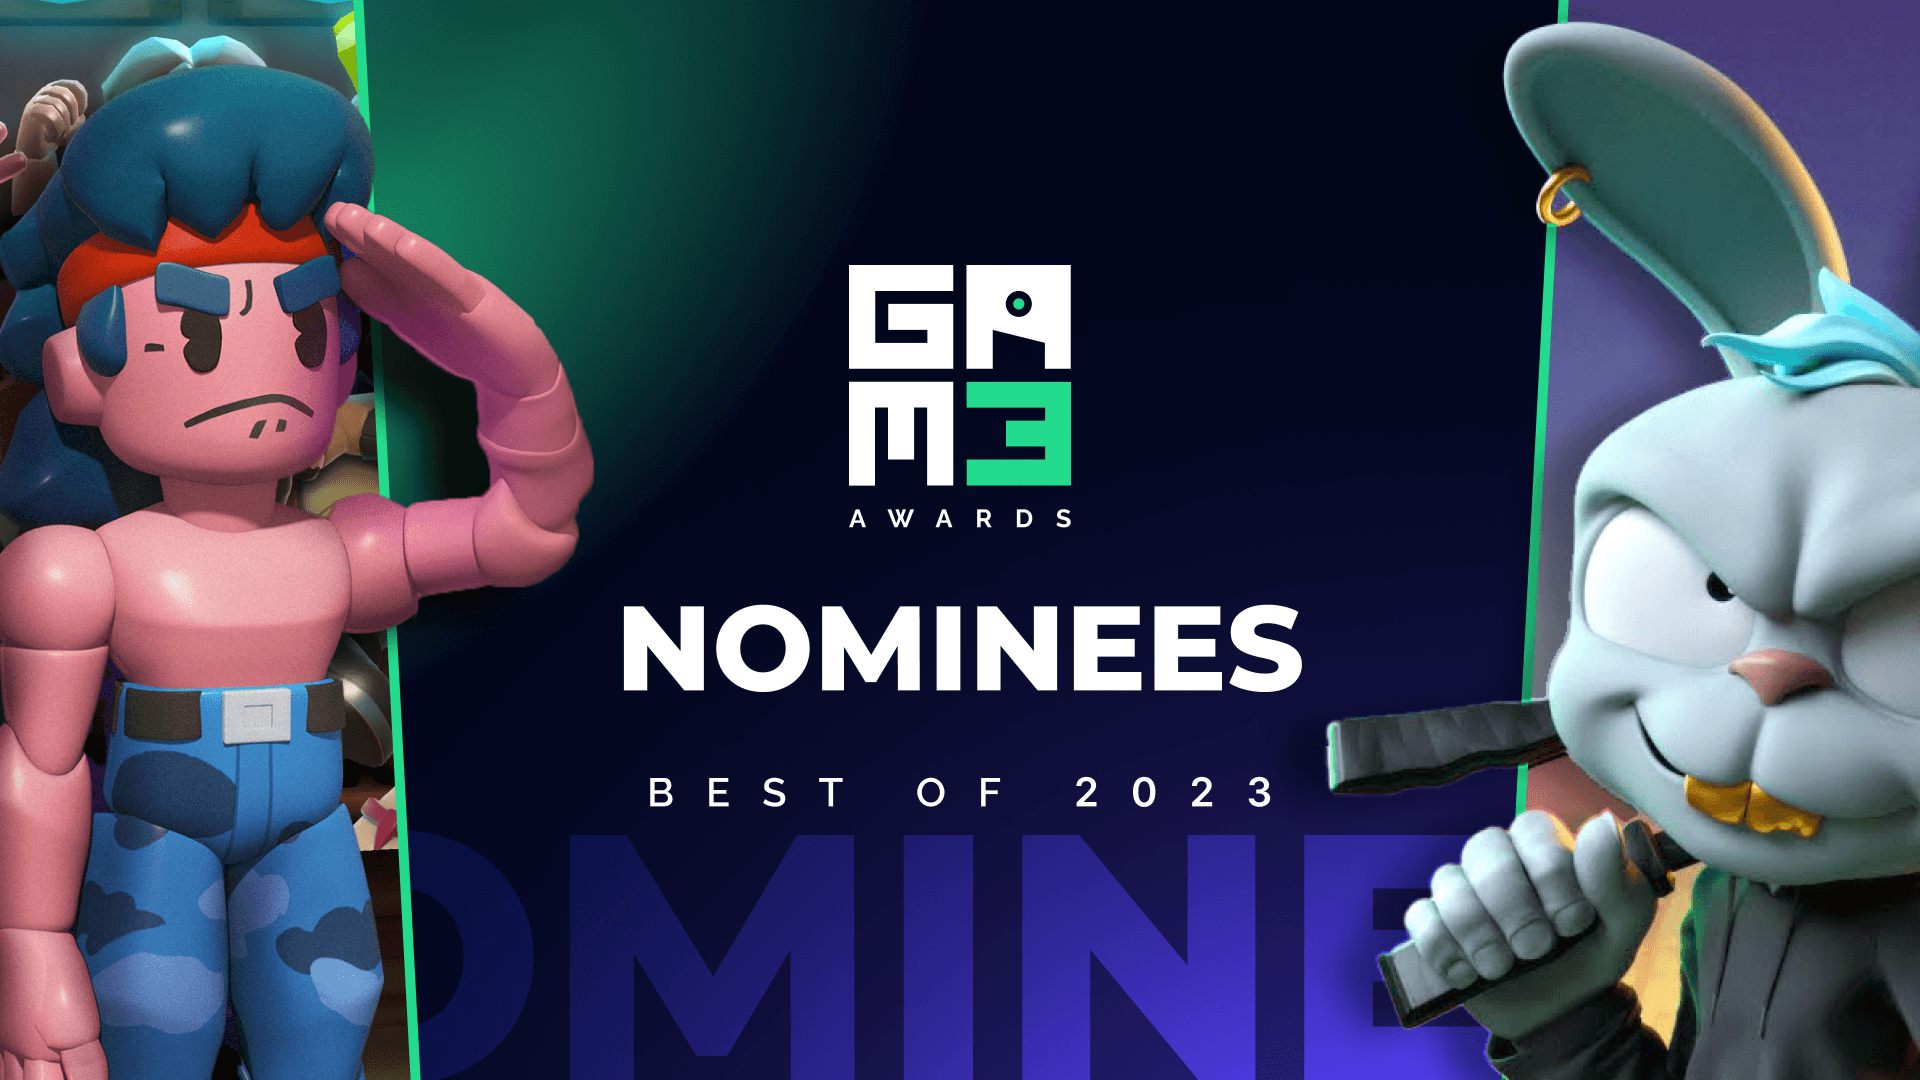 GAM3S.GG on X: TODAY IS THE DAY! 🏆🎮🤩 Tune into our #GAM3Awards